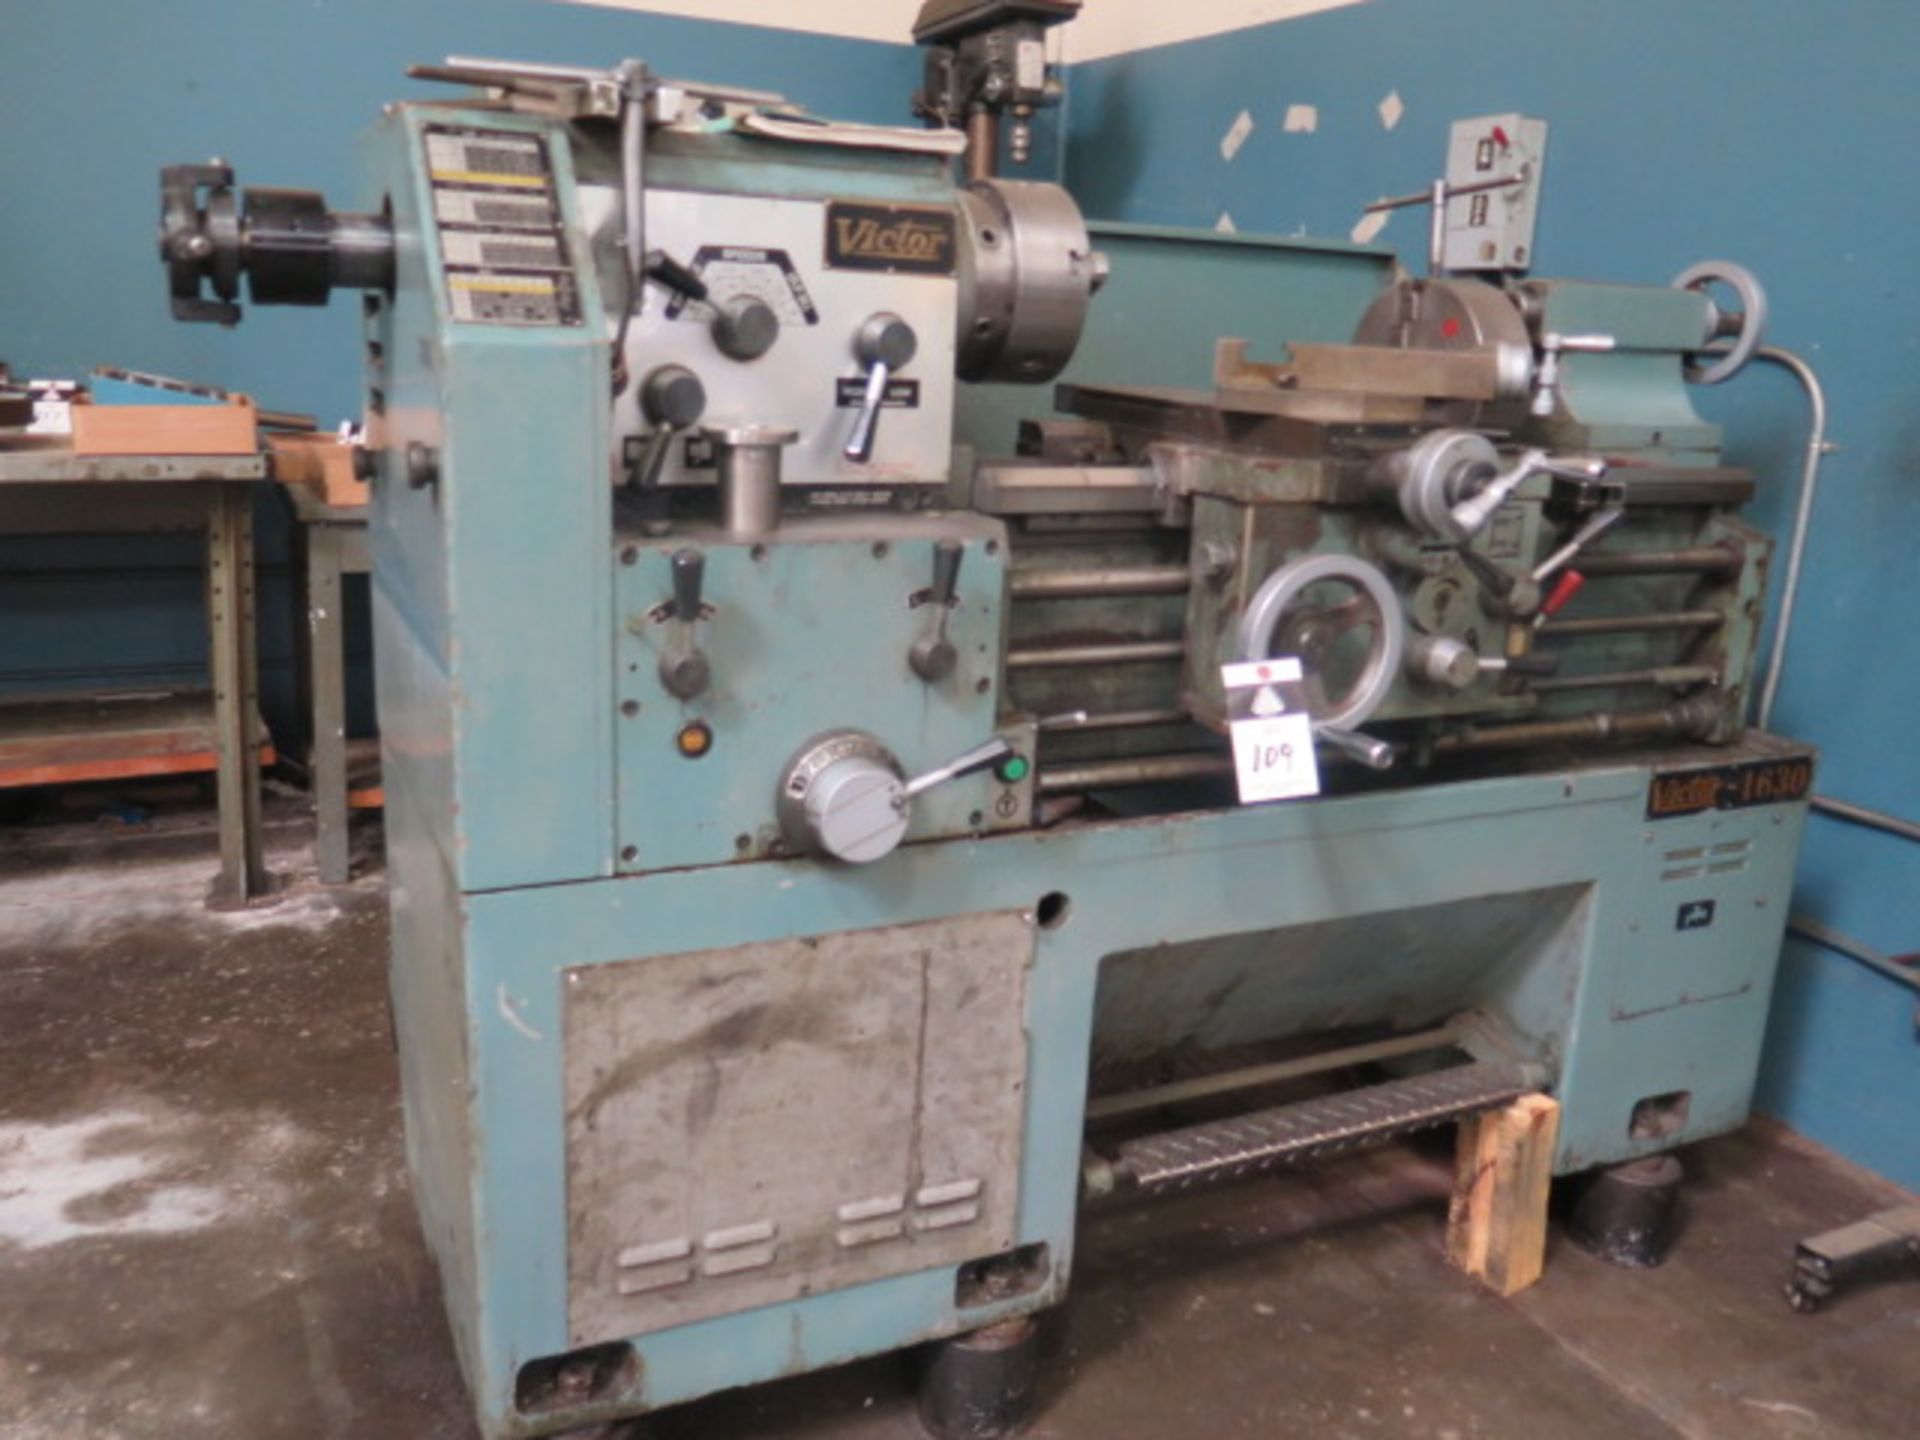 Victor 1630 16” x 30” Geared Head Gap Bed Lathe s/n 551286 w/ 65-1800 RPM, Inch/mm Threading, - Image 2 of 11